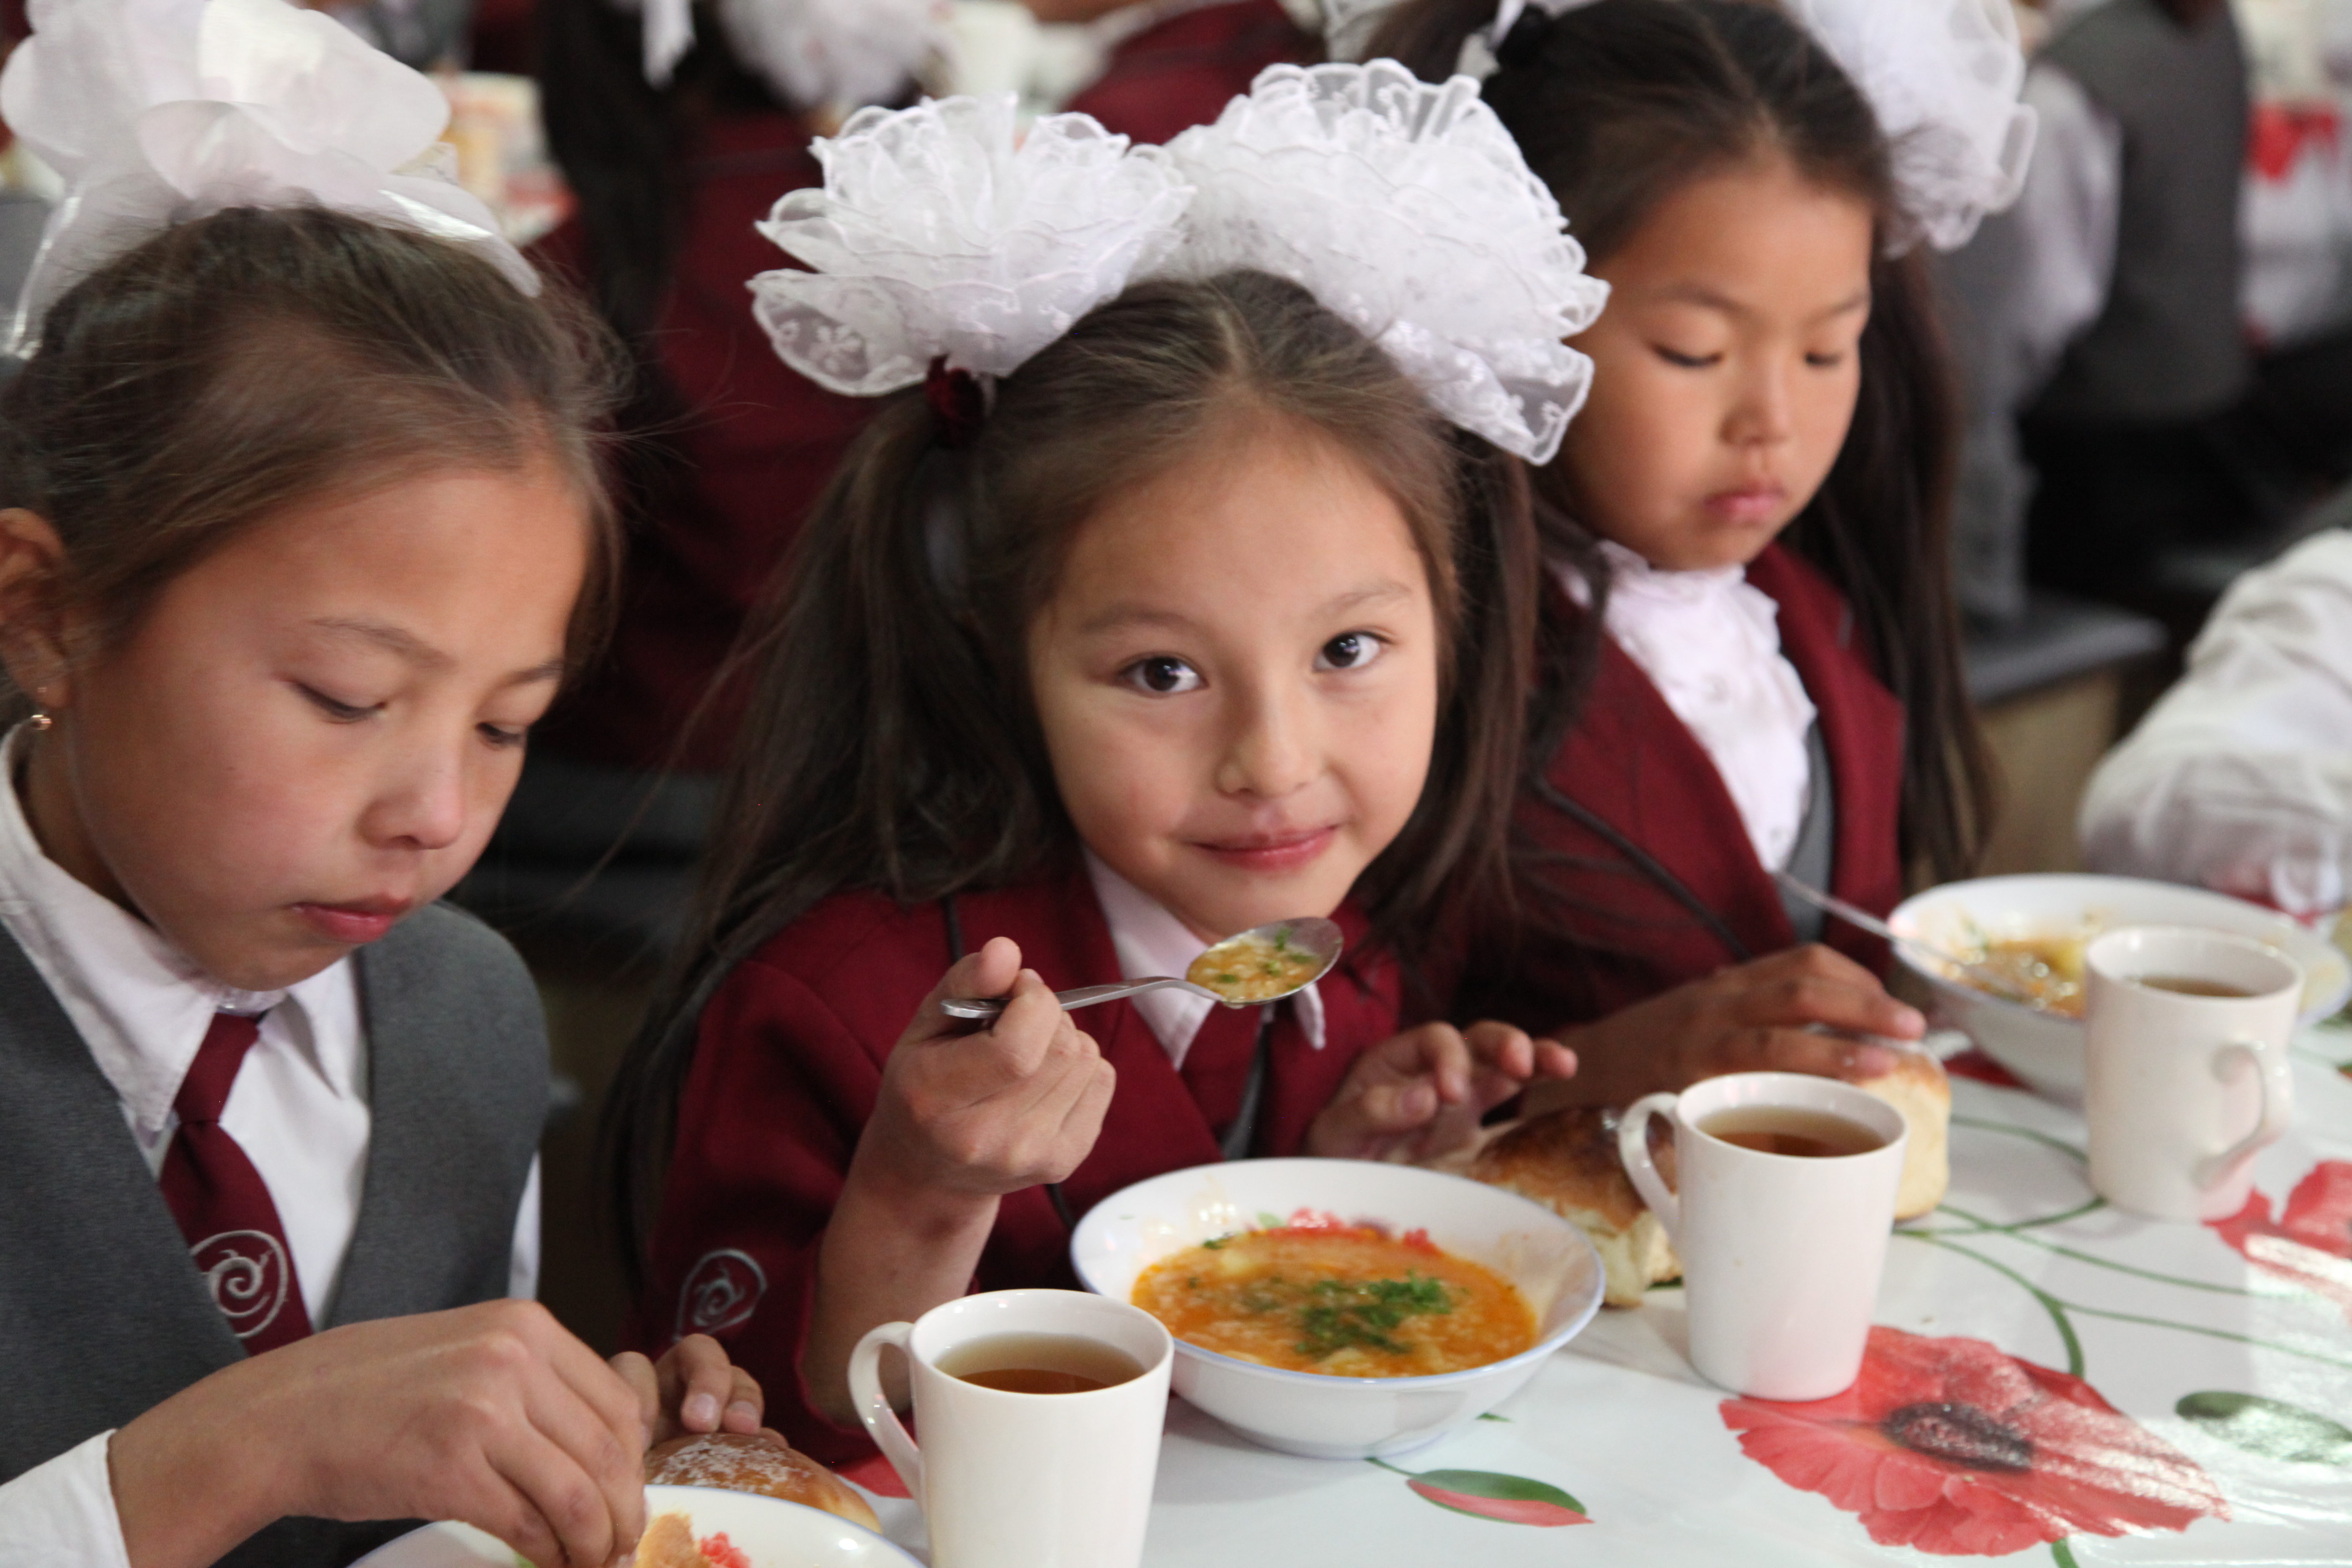 Over 5,000 Kyrgyz school students enjoy nutritious lunches in schools